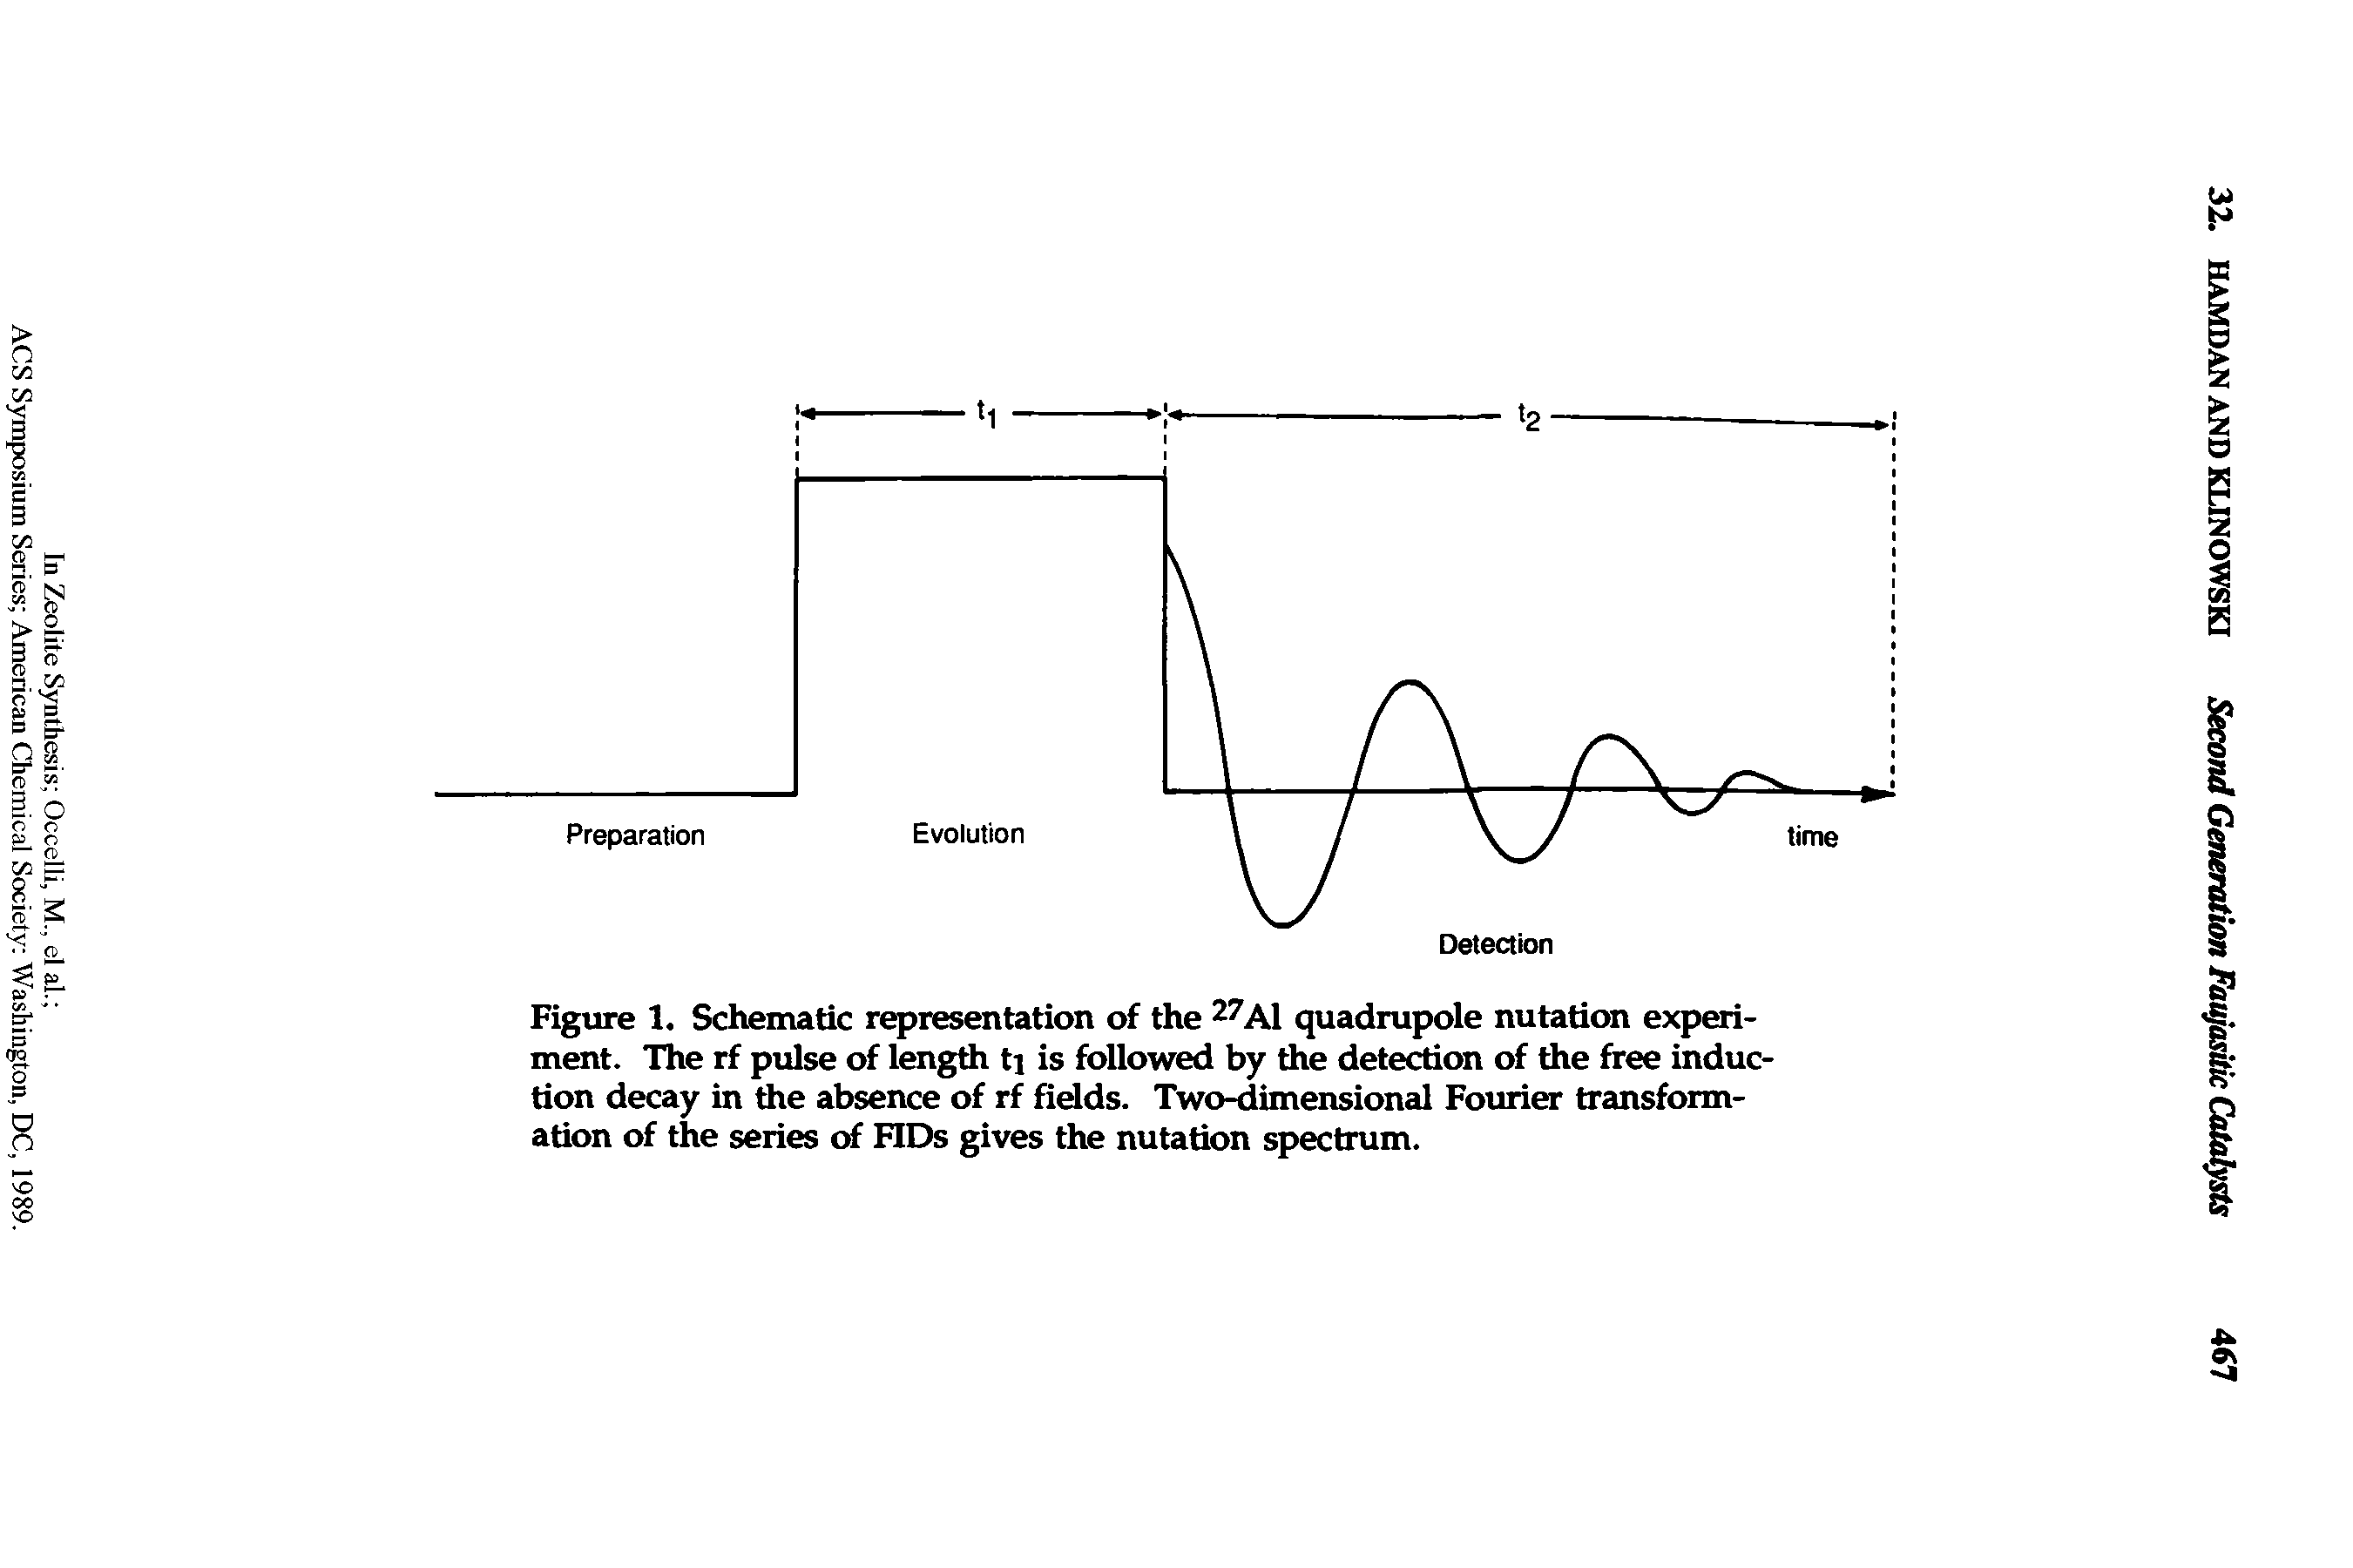 Figure 1. Schematic representation of the 27A1 quadrupole nutation experiment. The rf pulse of length ti is followed by the detection of the free induction decay in die absence of rf fields. Two-dimensional Fourier transformation of the series of FIDs gives the nutation spectrum.